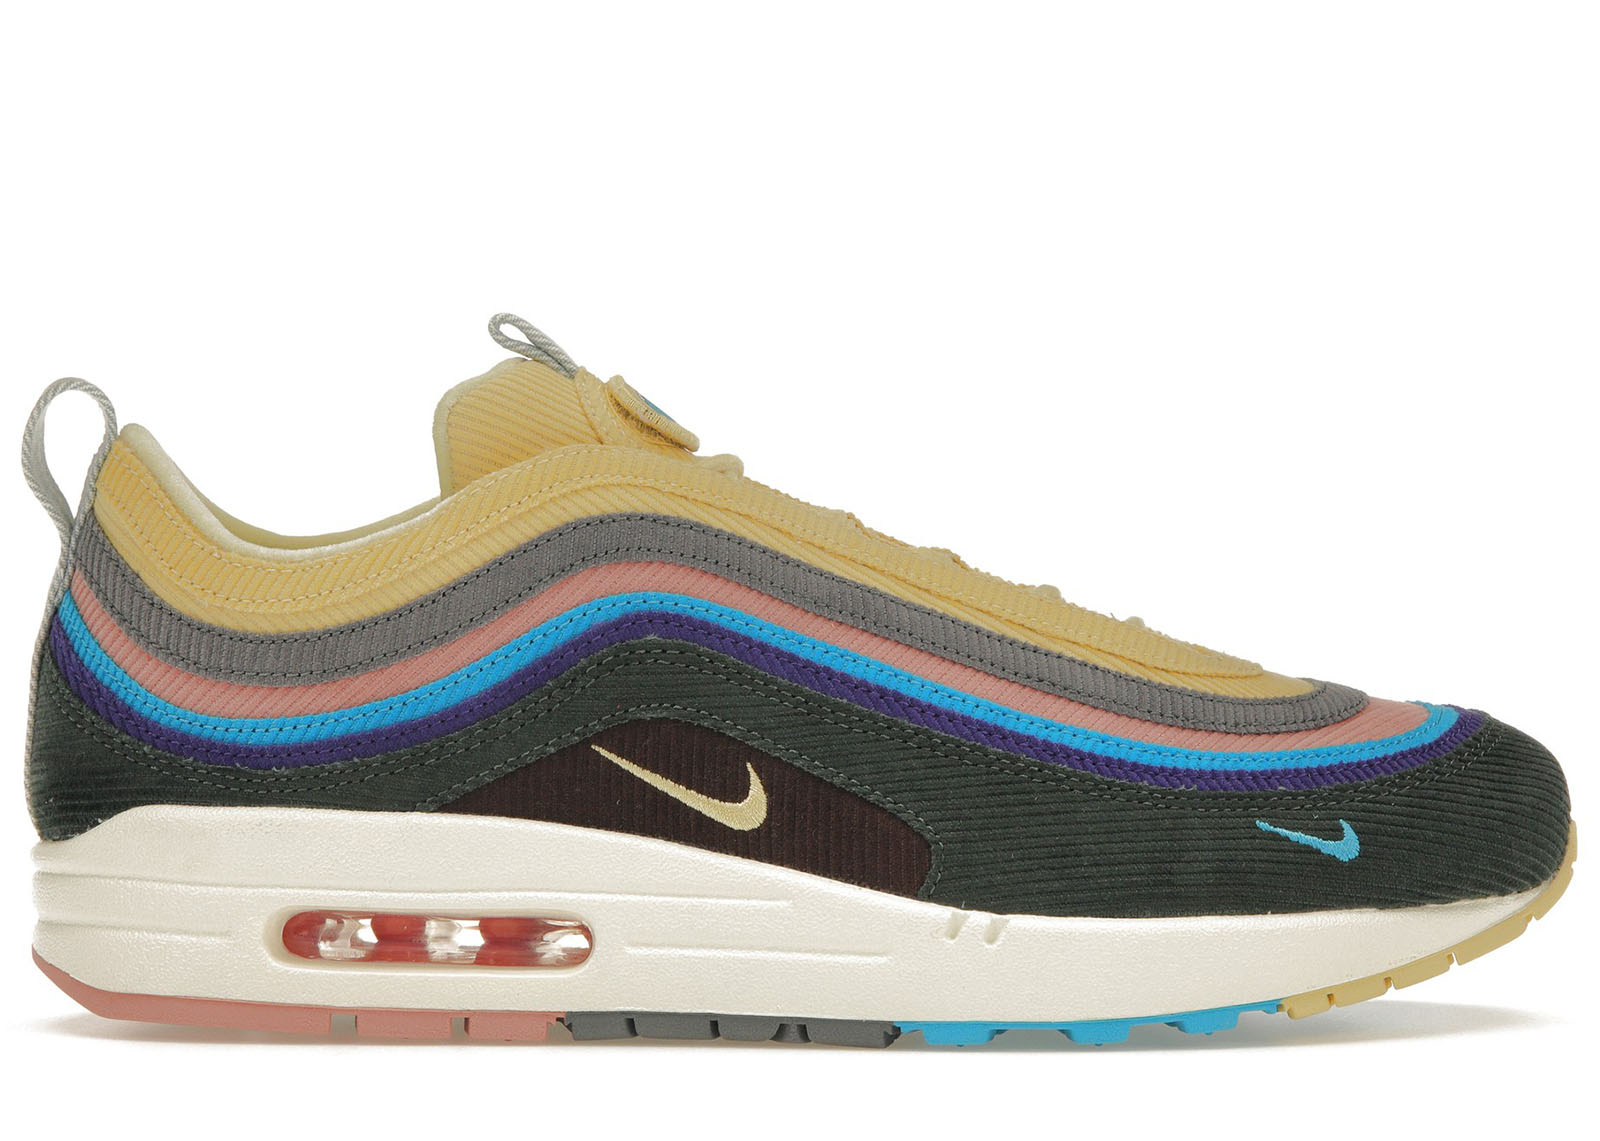 AIR MAX 1/97 VF SW SEAN WOTHERSPOON